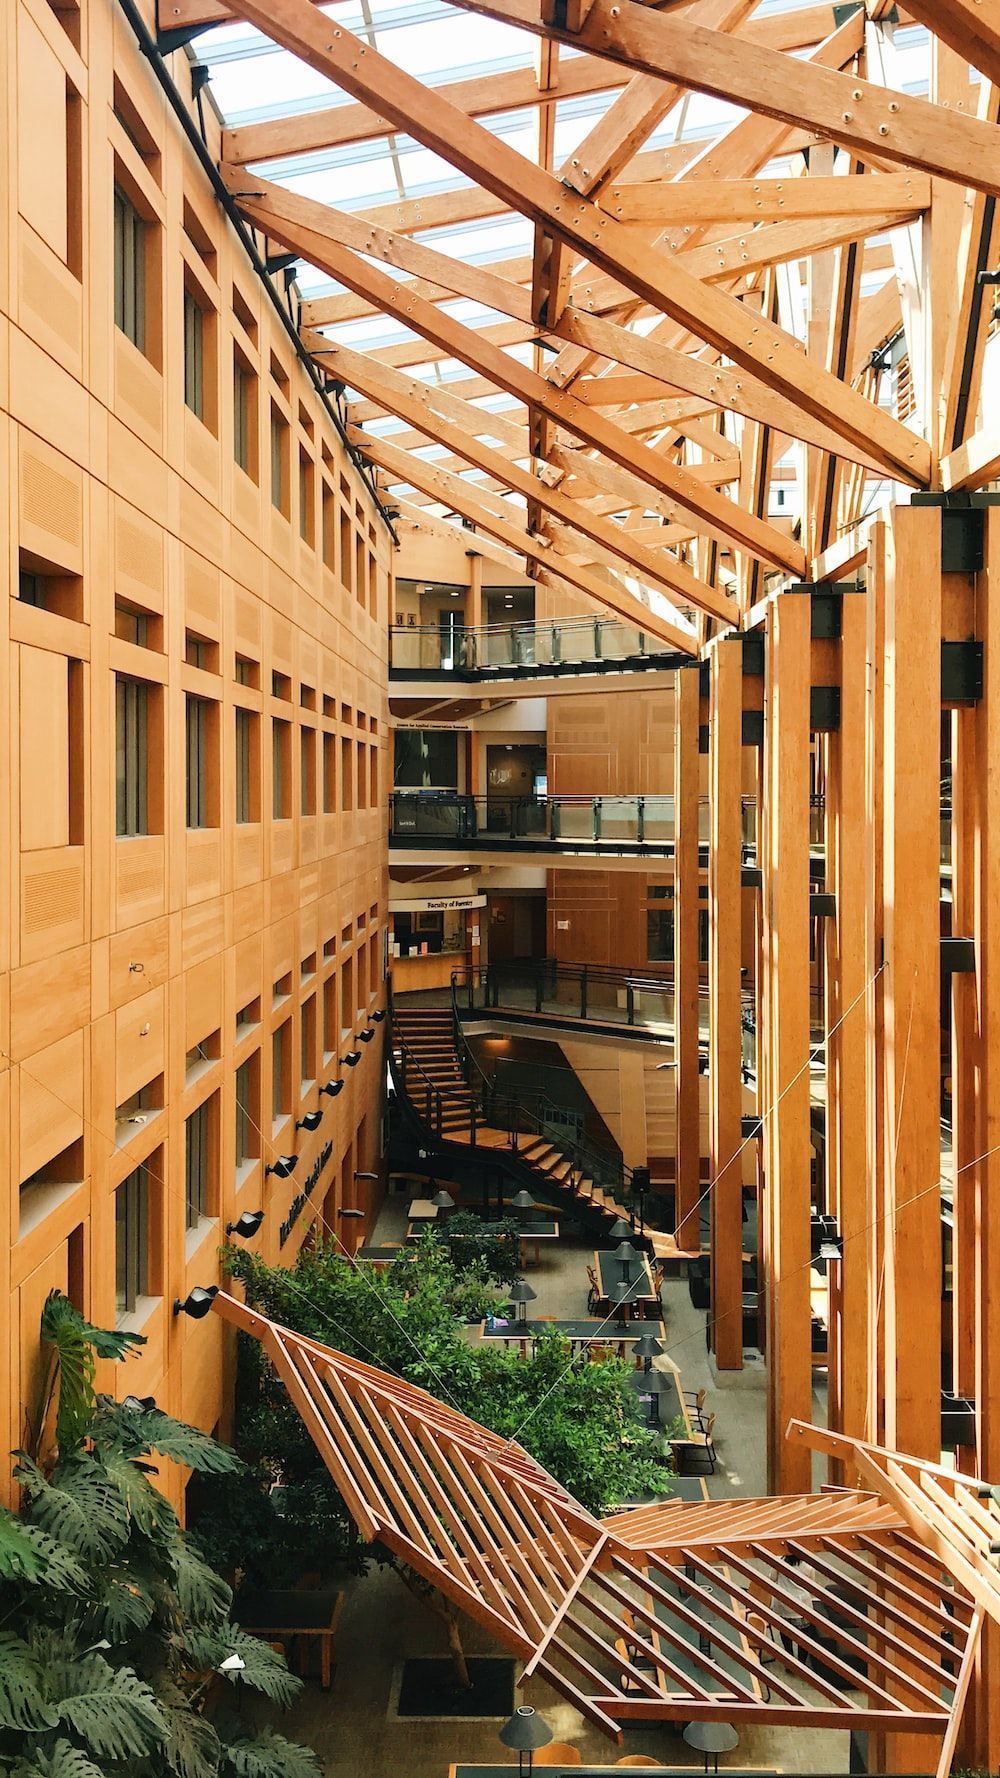 University Of British Columbia Picture. Download Free Image